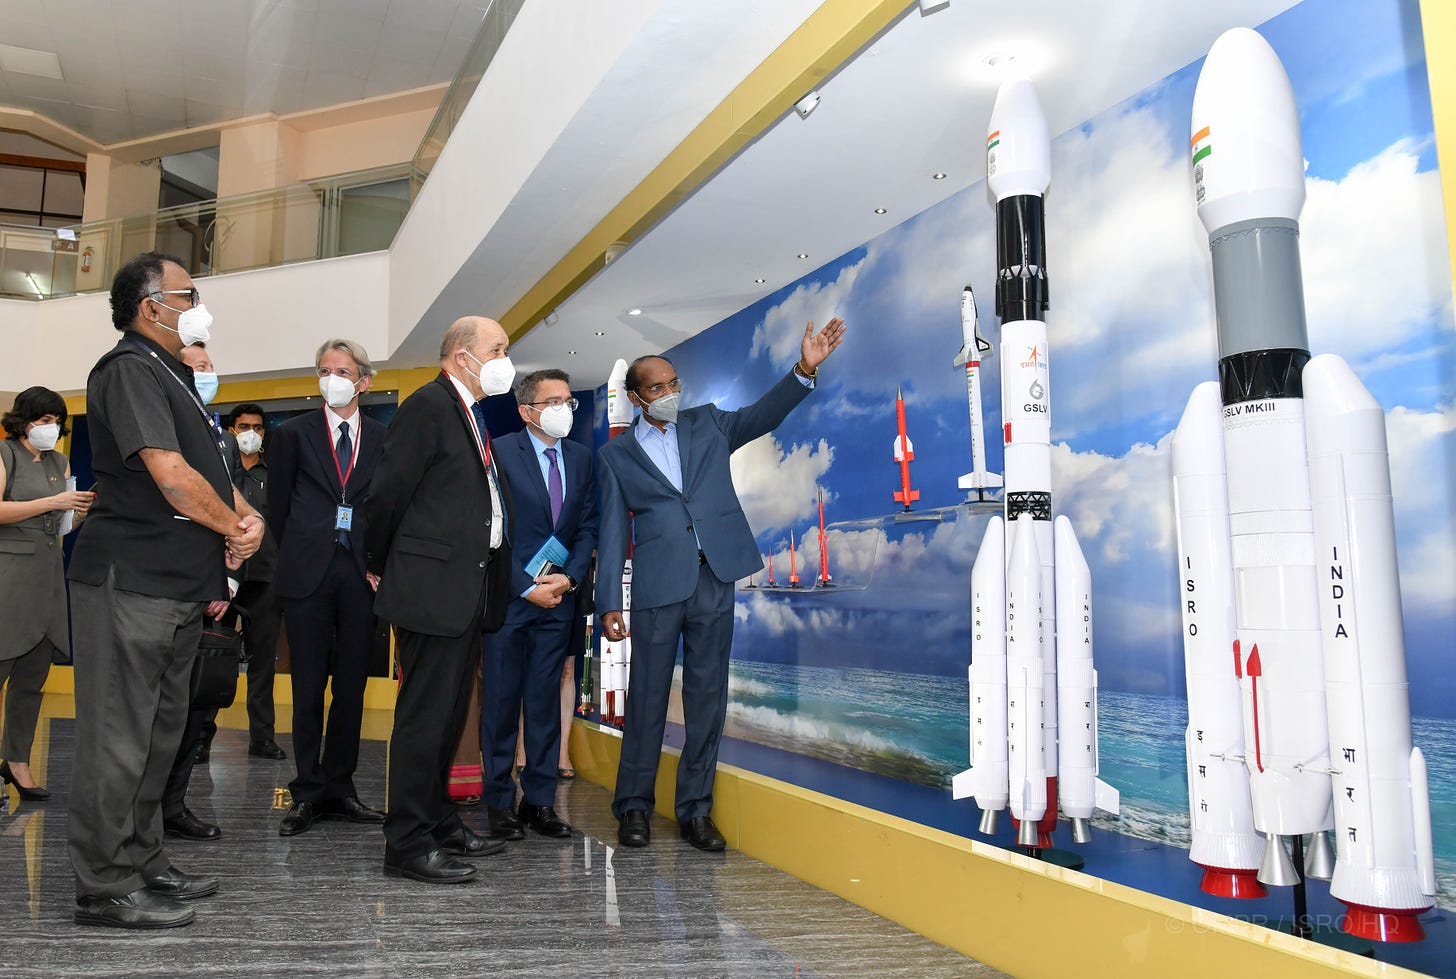 French Minister has visited ISRO Headquarters and HSFC on April 15, 2021